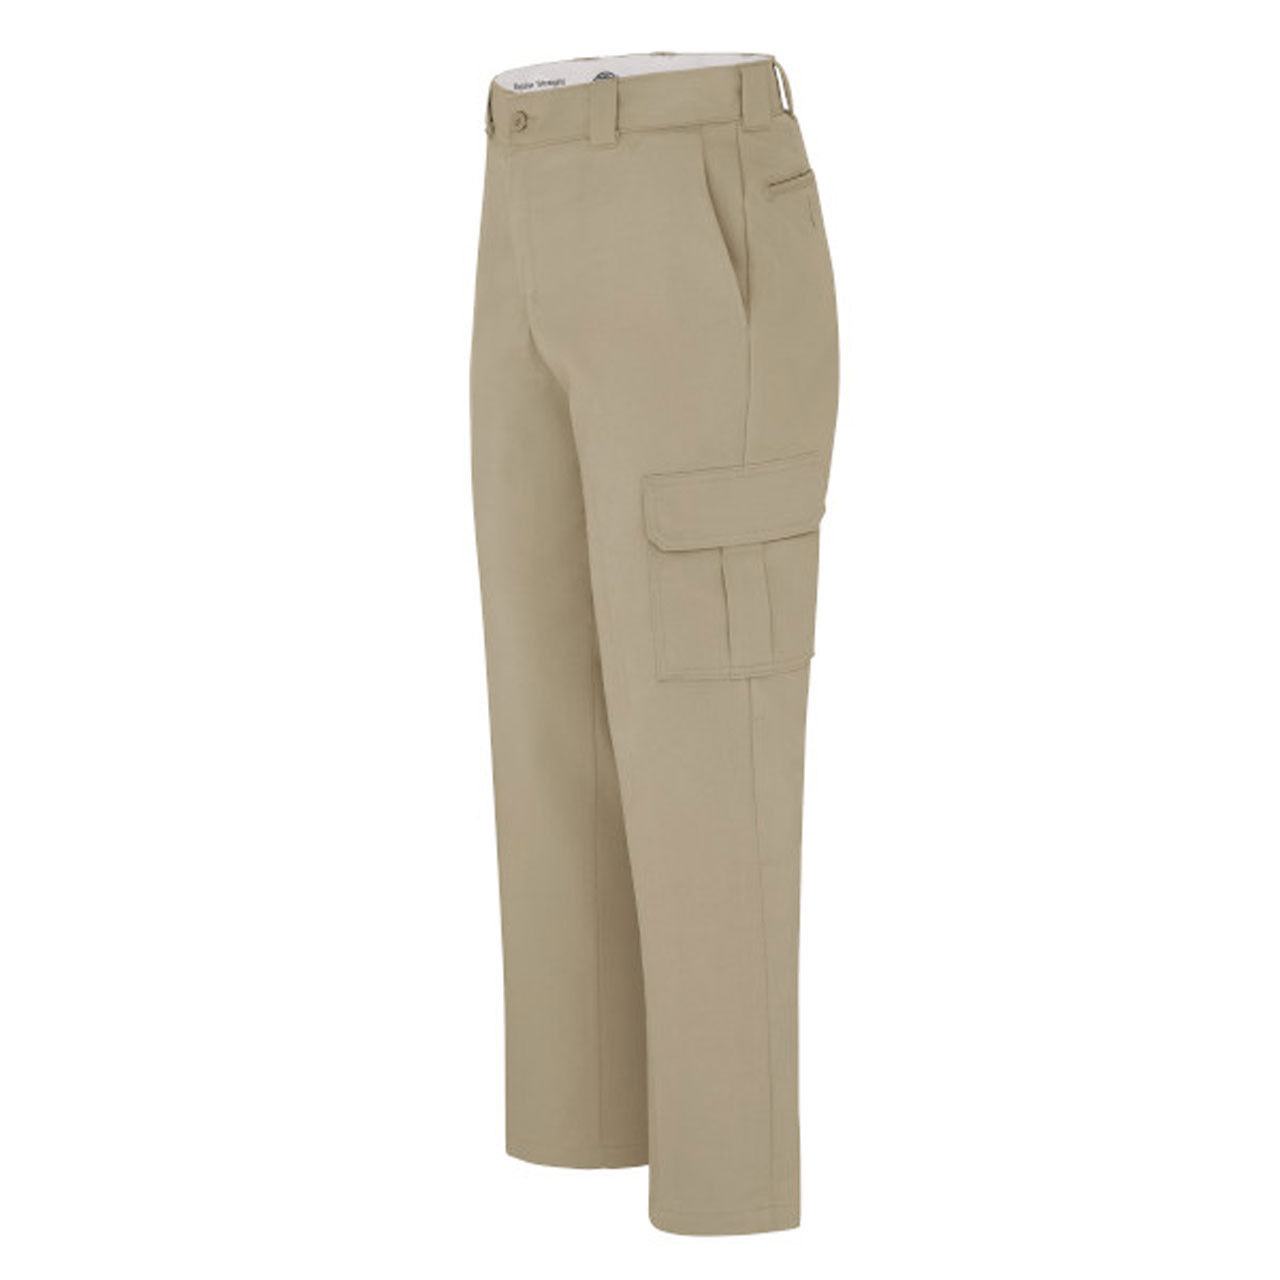 Is the material of the Dickies® Men's Cargo Pant wp95?